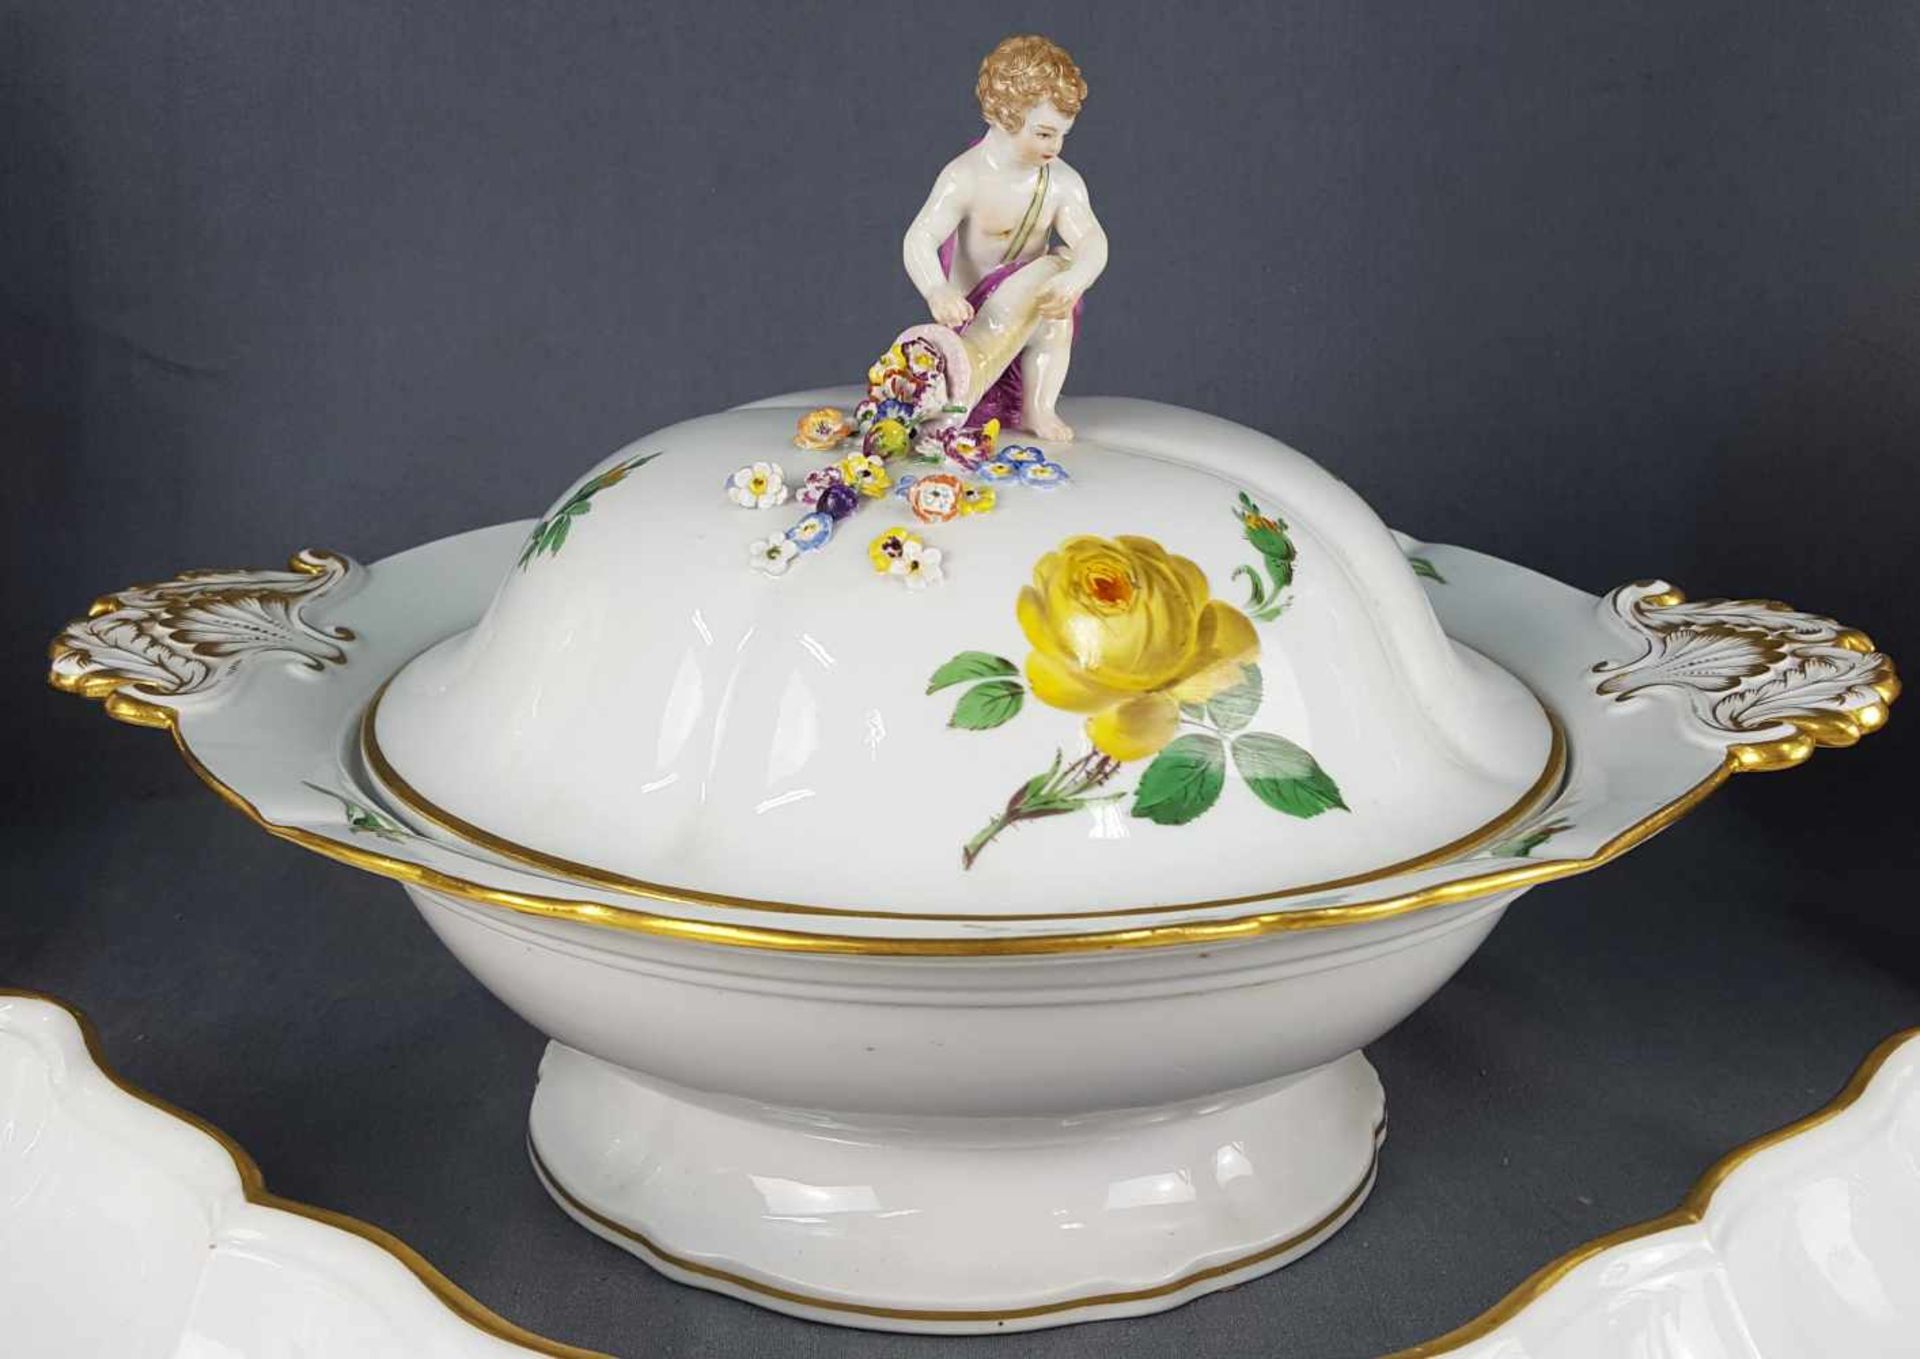 Dining service Meissen porcelain, yellow rose with gold rim. - Image 17 of 18